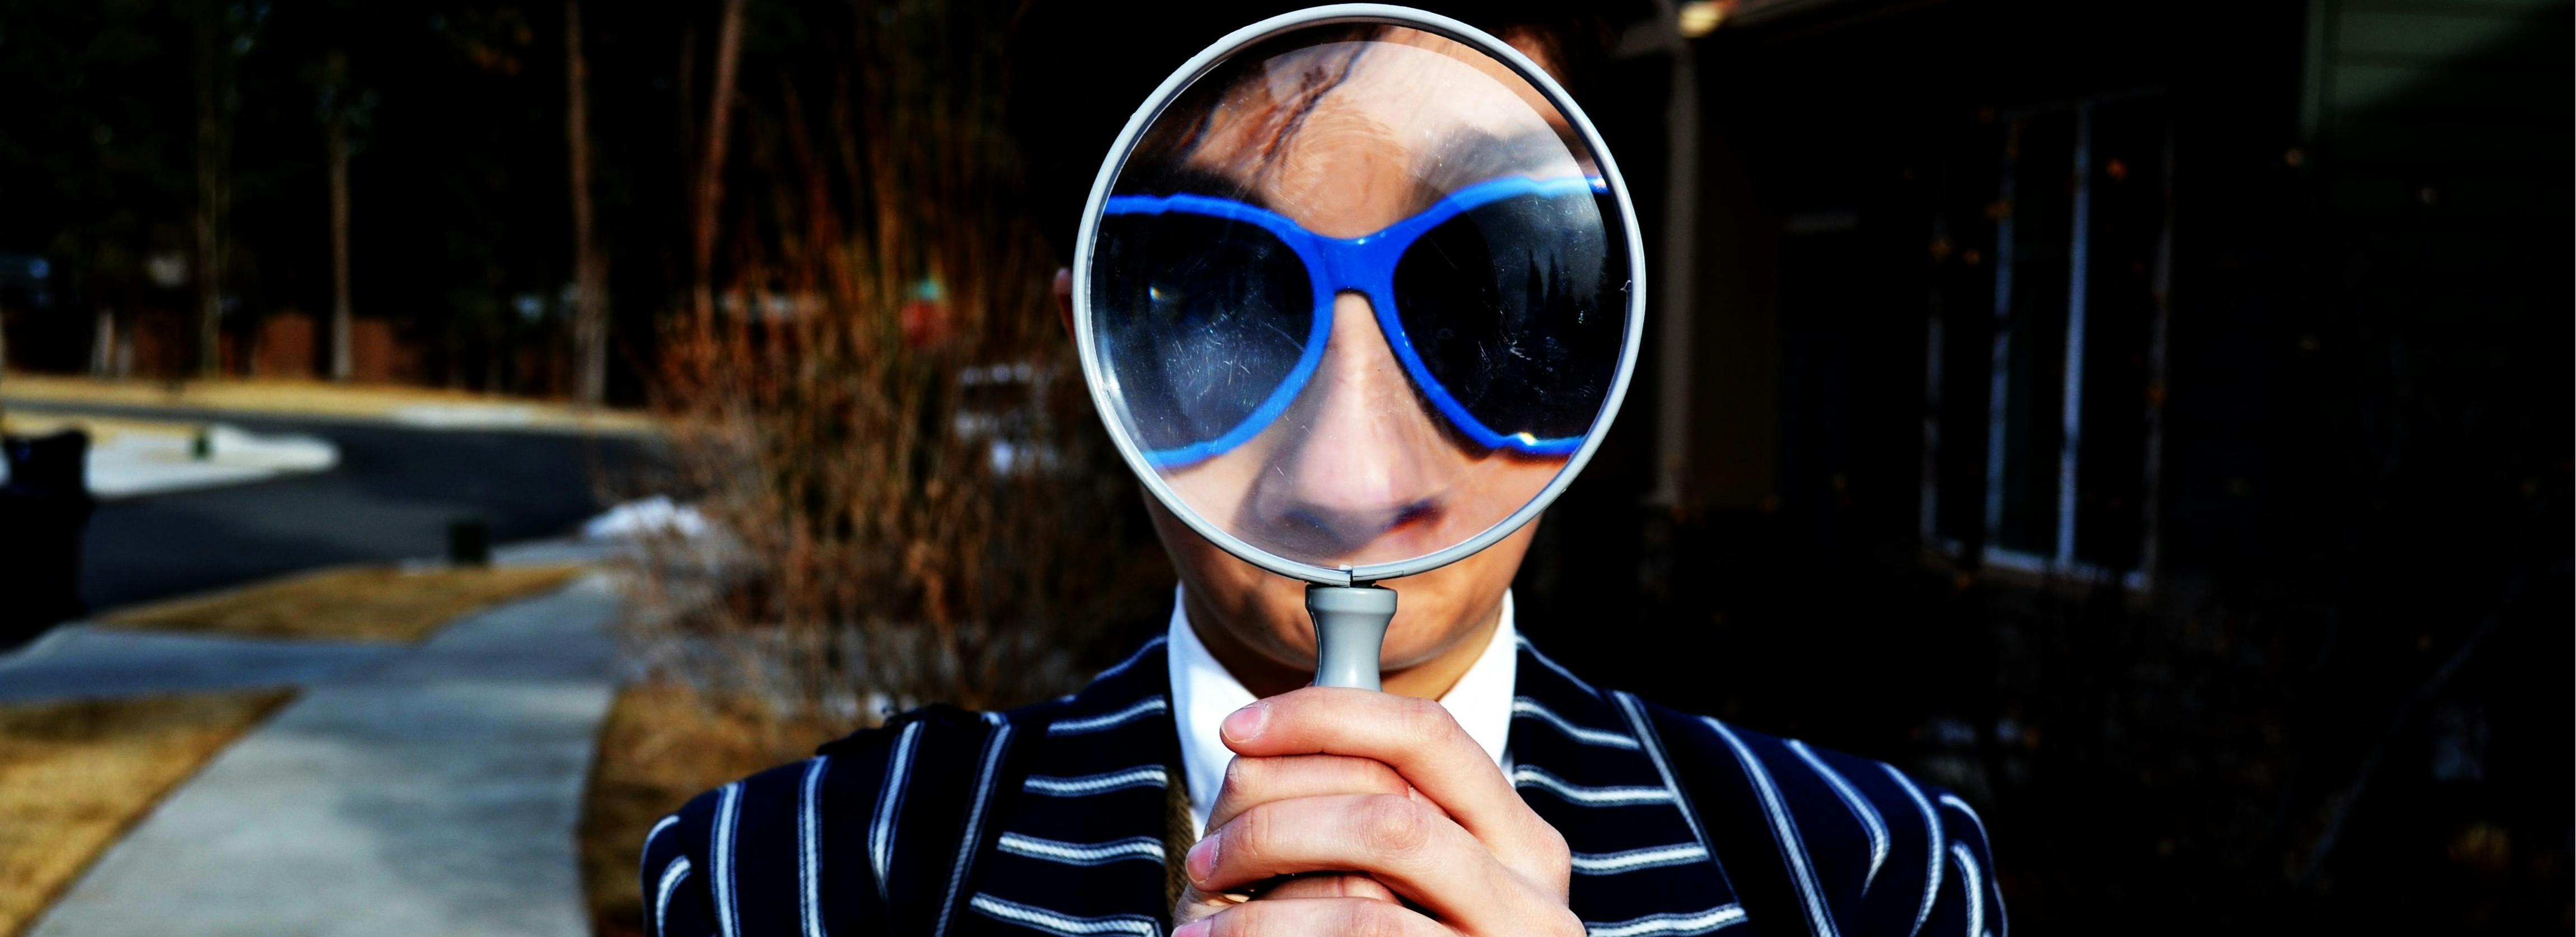 A person in a striped suit and sunglasses holds a magnifying glass in front of their face making their eyes very large